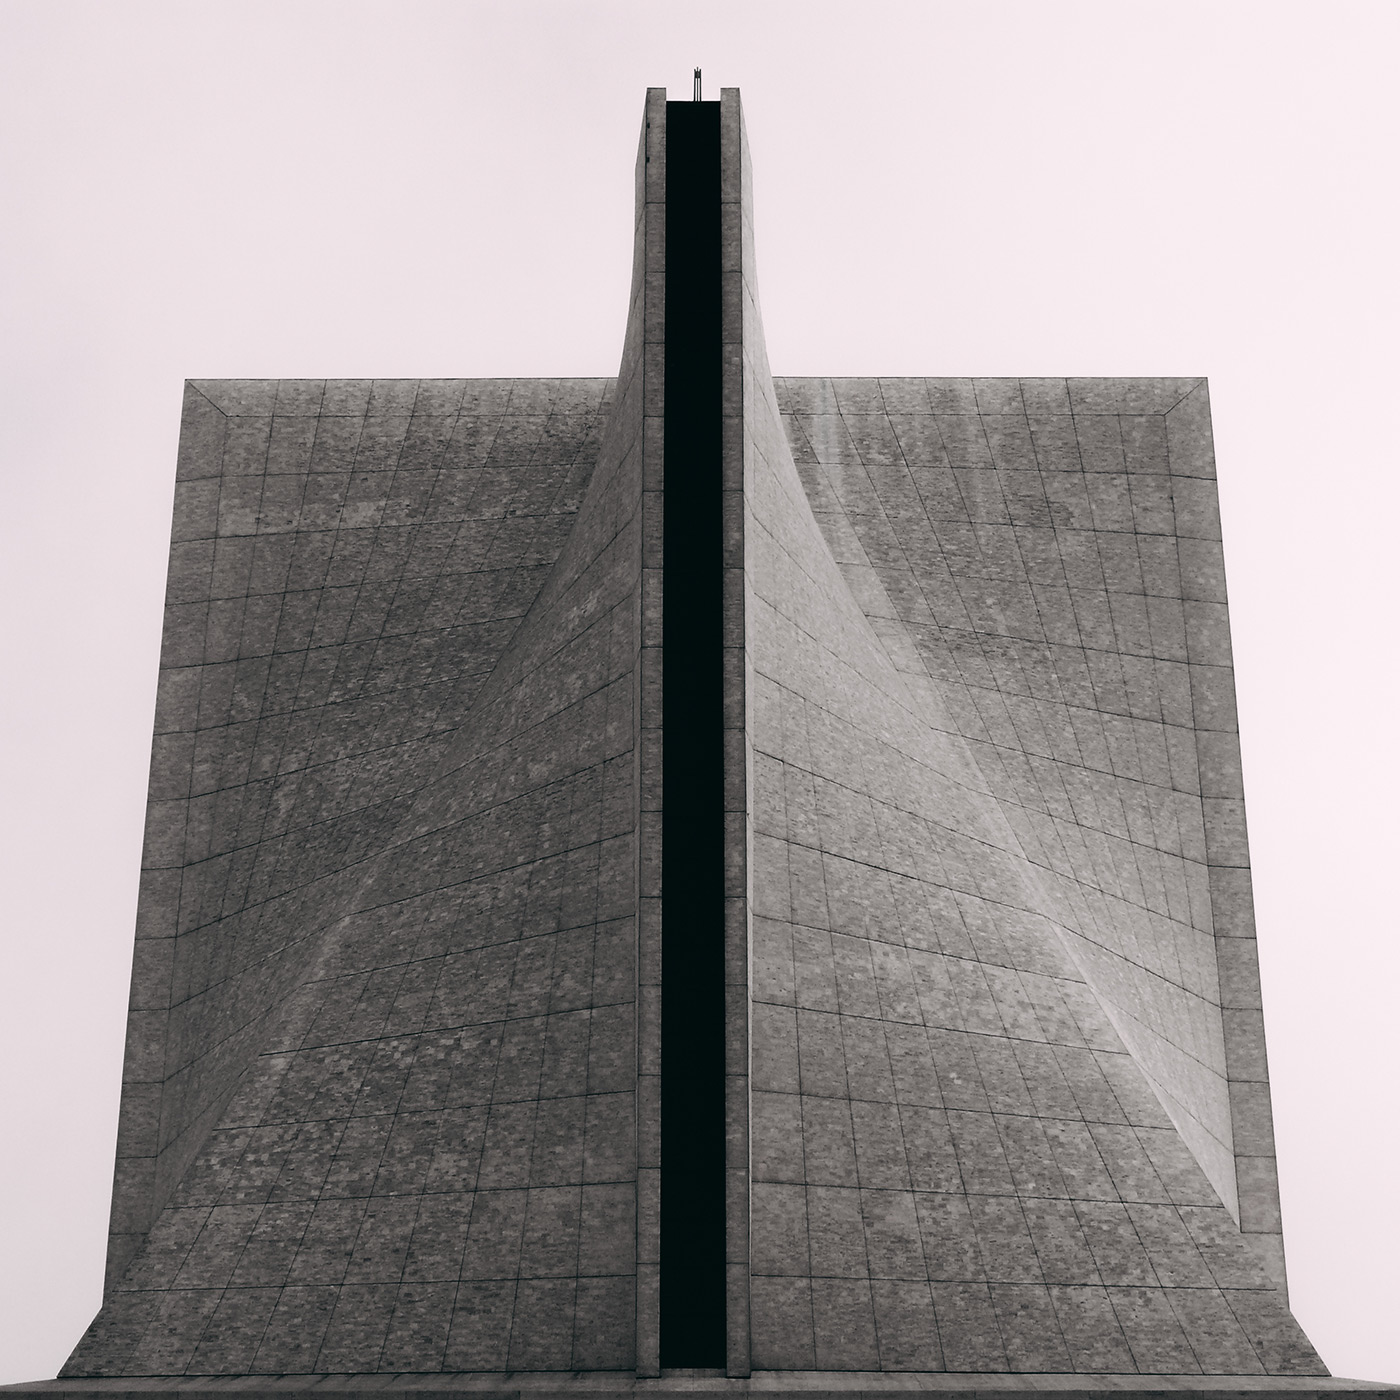 Saint Mary's Cathedral of the Assumption <br />Location: San Francisco, USA <br />Architects: Pietro Belluschi and Pier-Luigi Nervi